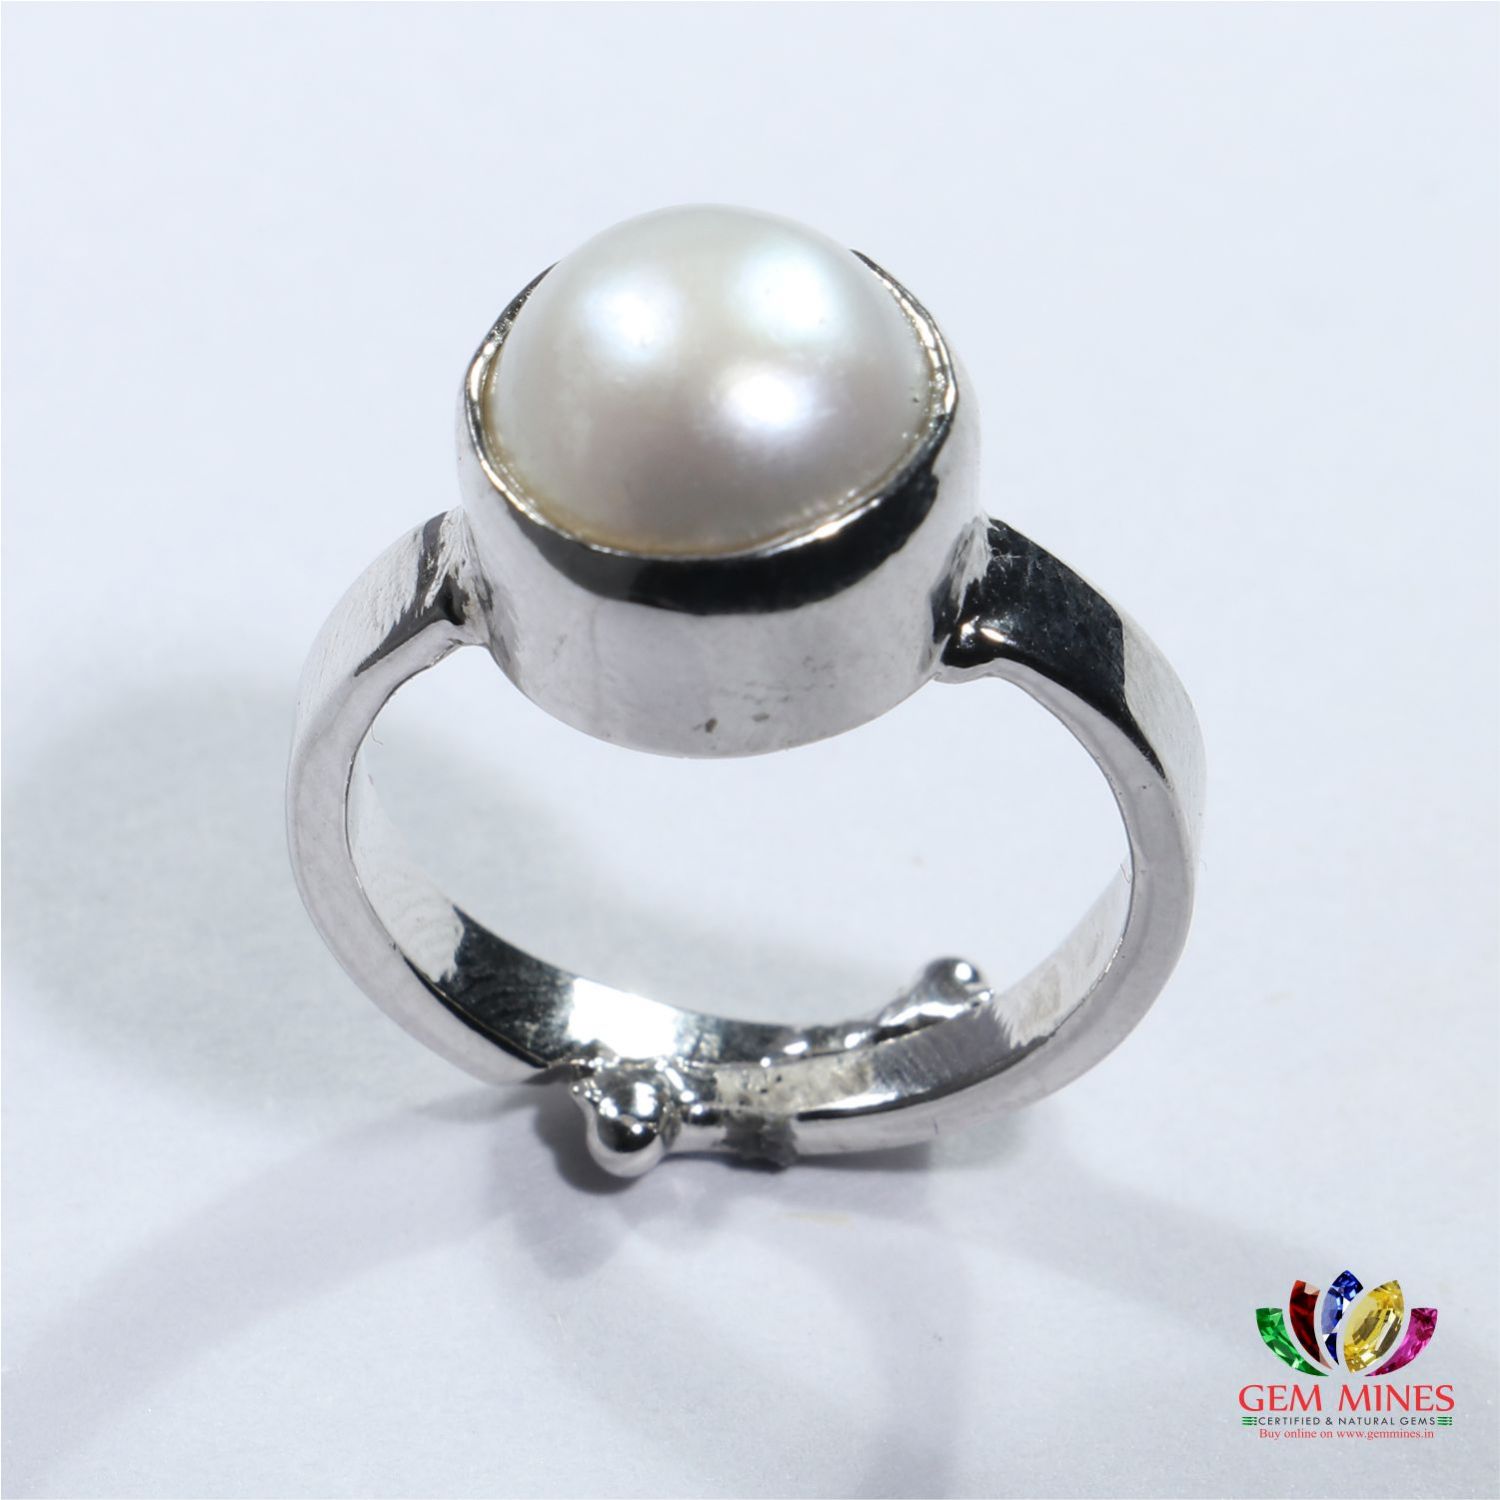 Buy quality Silver chandra stone ladies ring in Ahmedabad